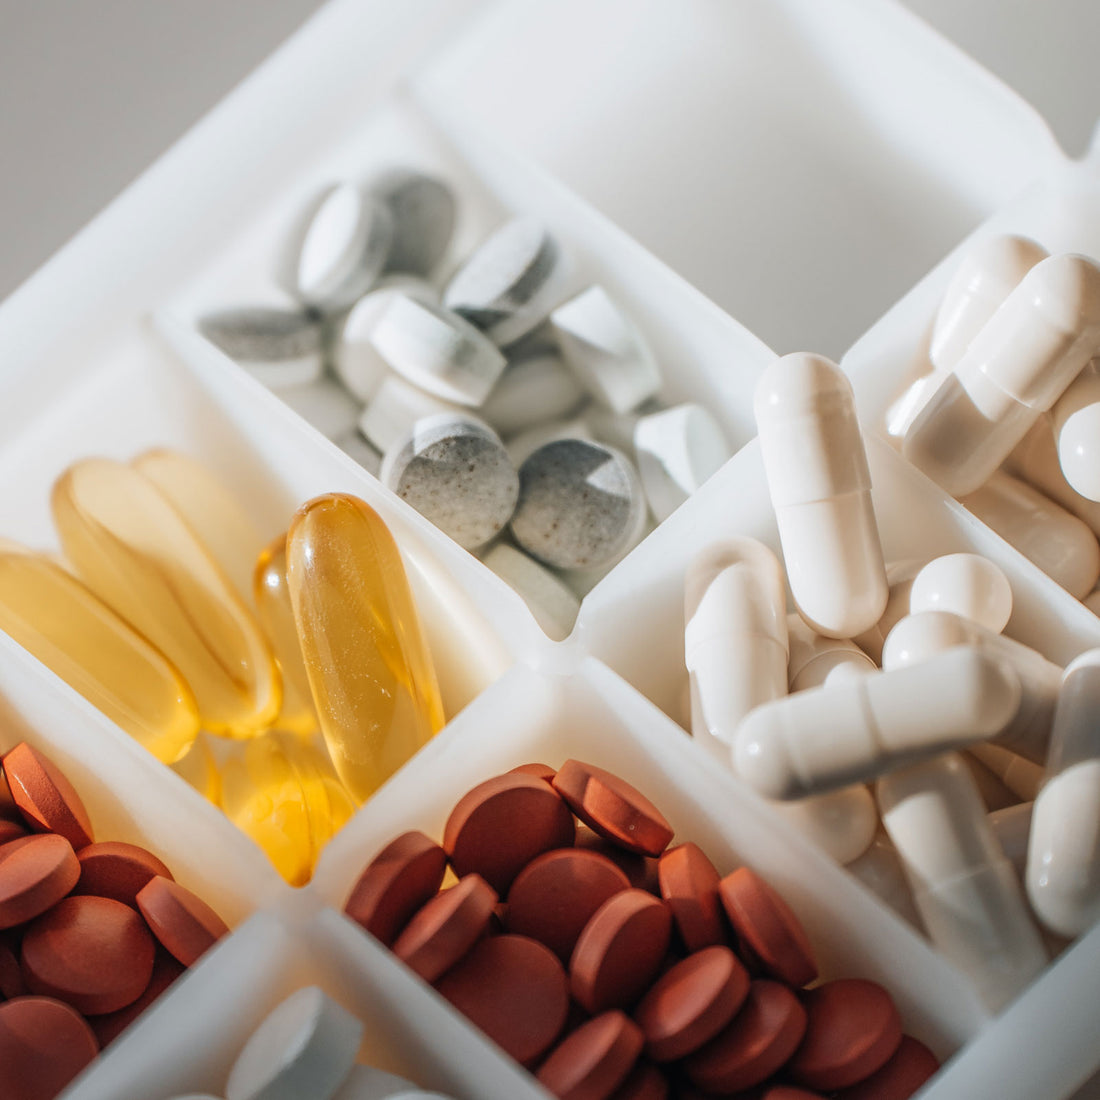 Are Supplements Safe to Take with My Medication?